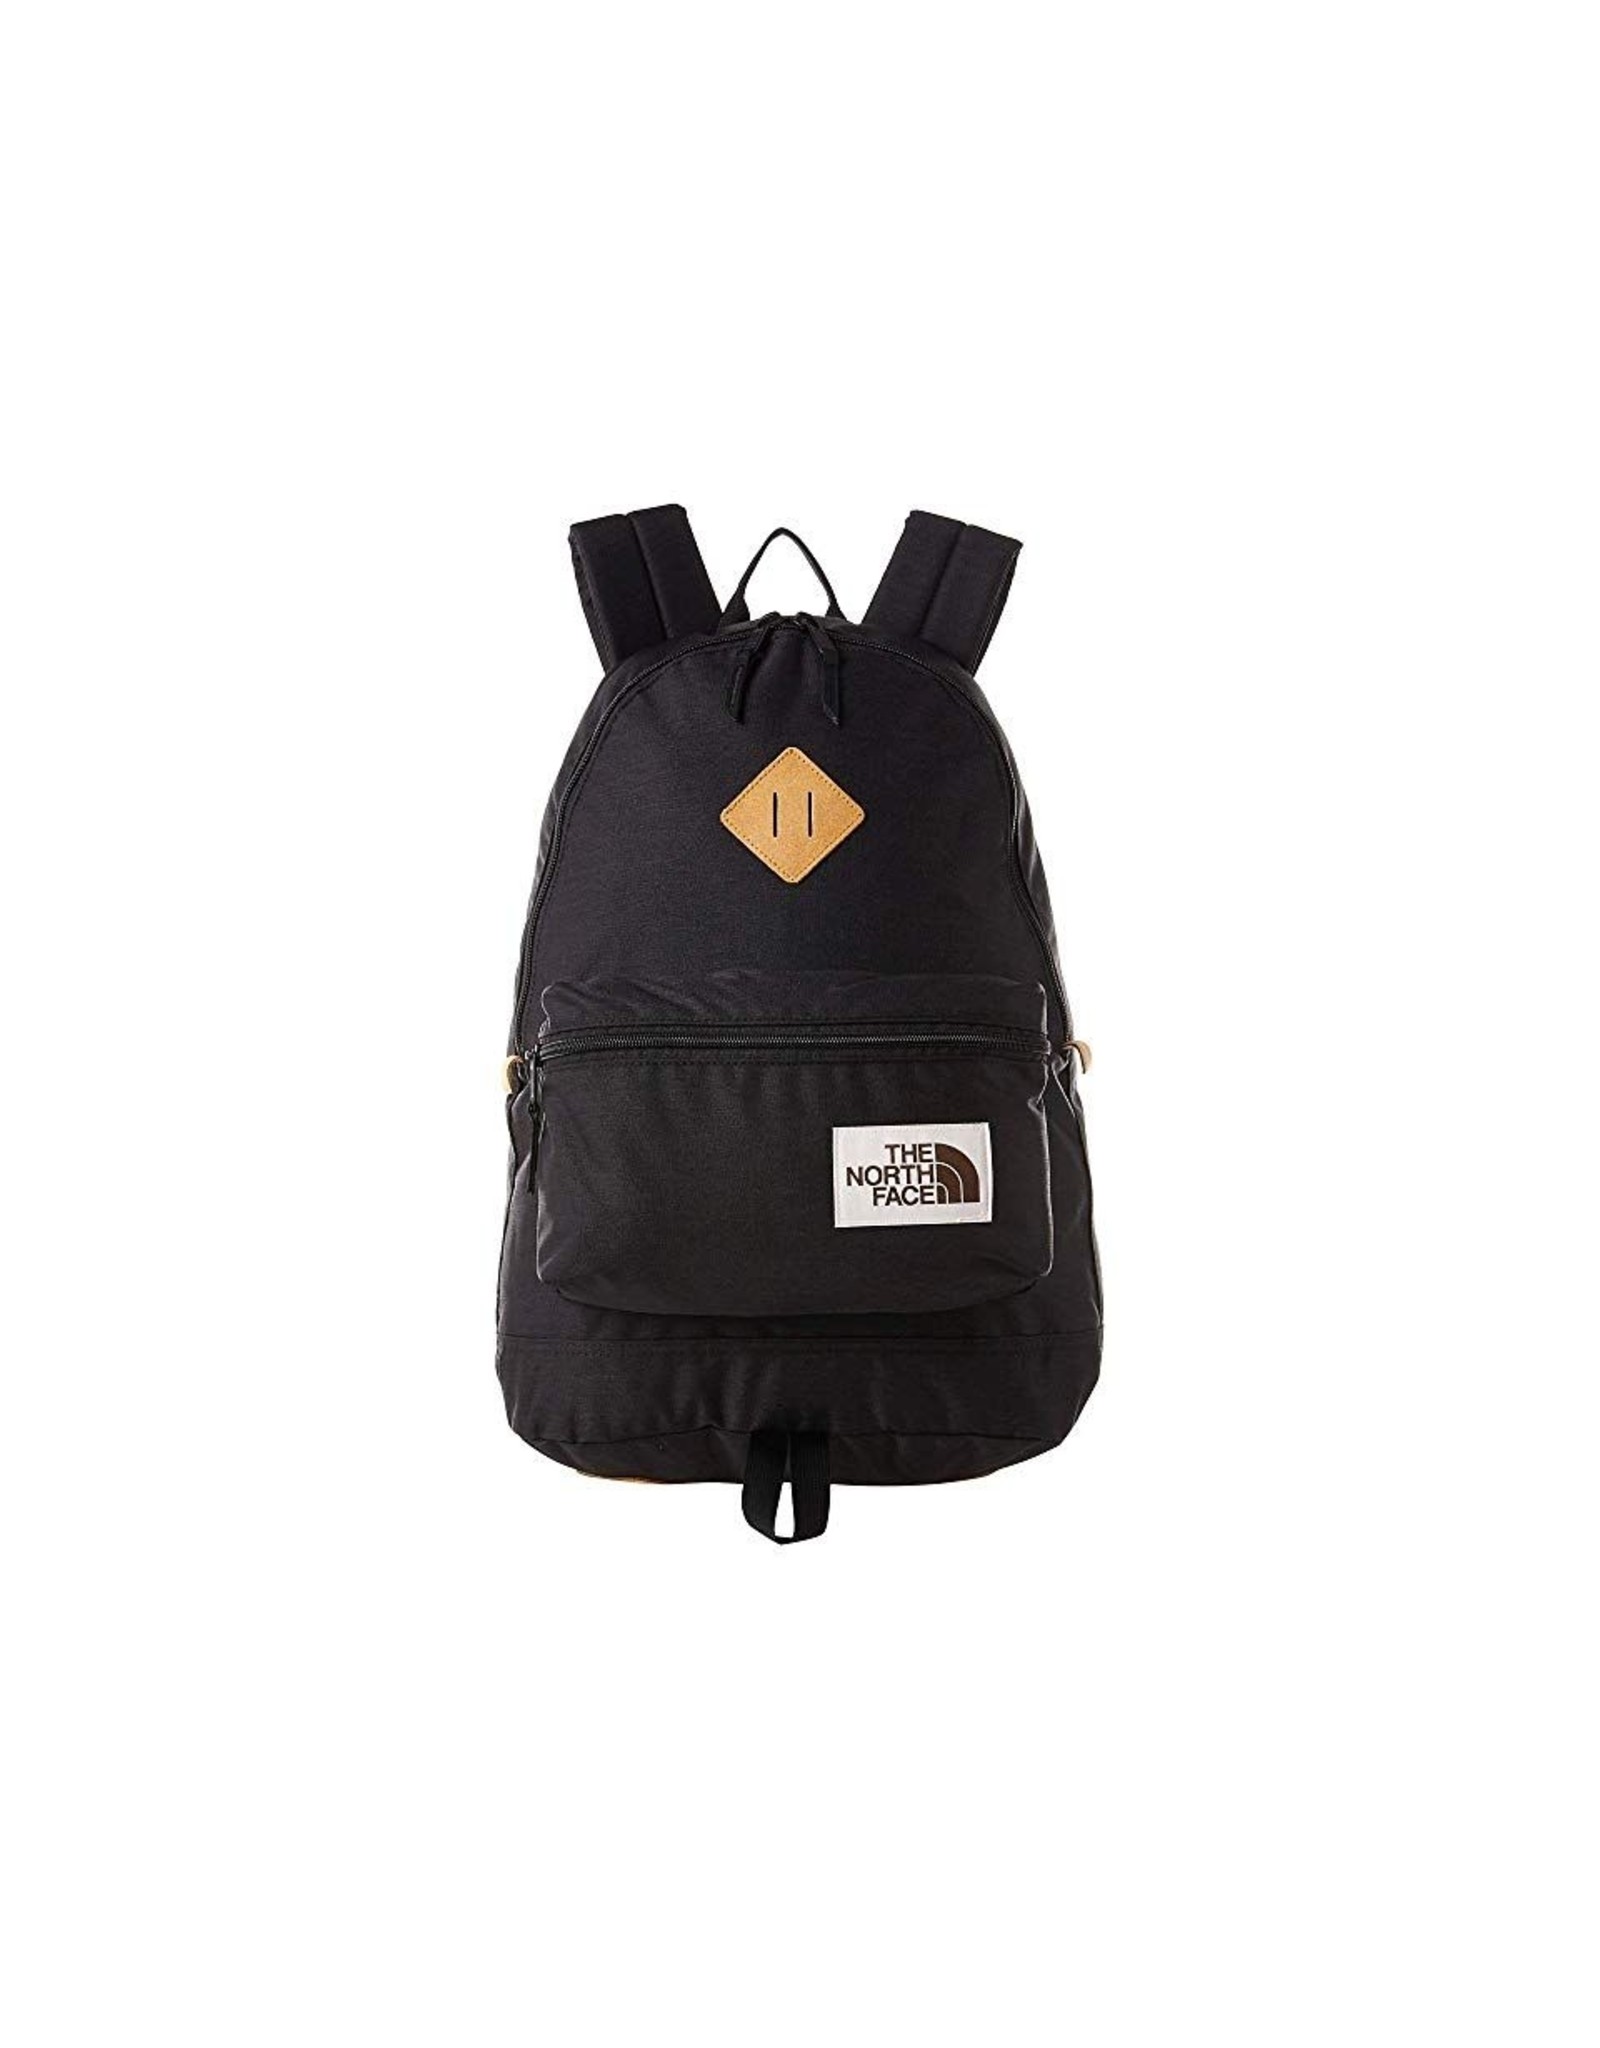 THE NORTH FACE BERKELEY DAYPACK